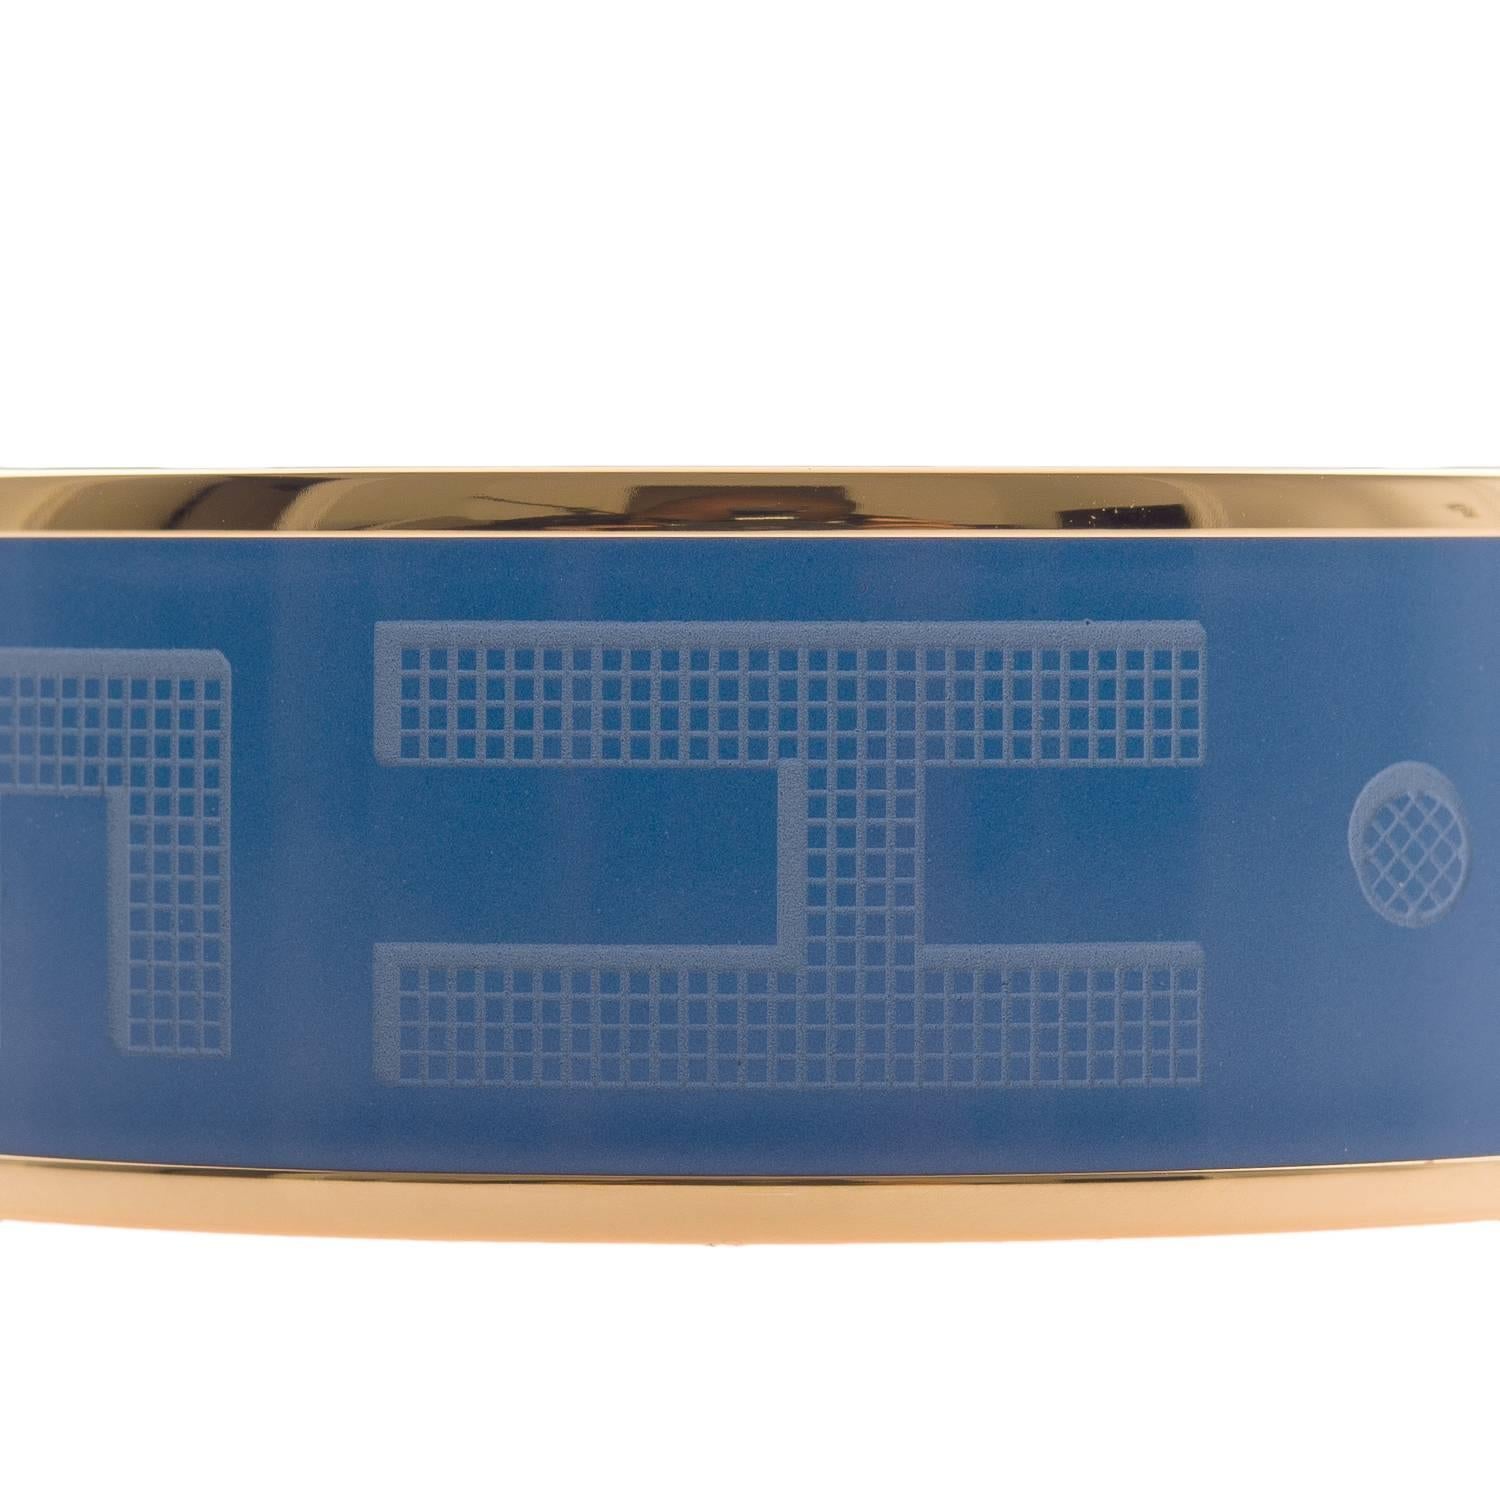 Hermes "Sellier" wide printed enamel bracelet size PM (65).
 
This bracelet depicts "Hermes" on a blue colored background with gold plated hardware.

Origin: France
 
Condition: Pristine
 
Accompanied by: Hermes box, dustbag and